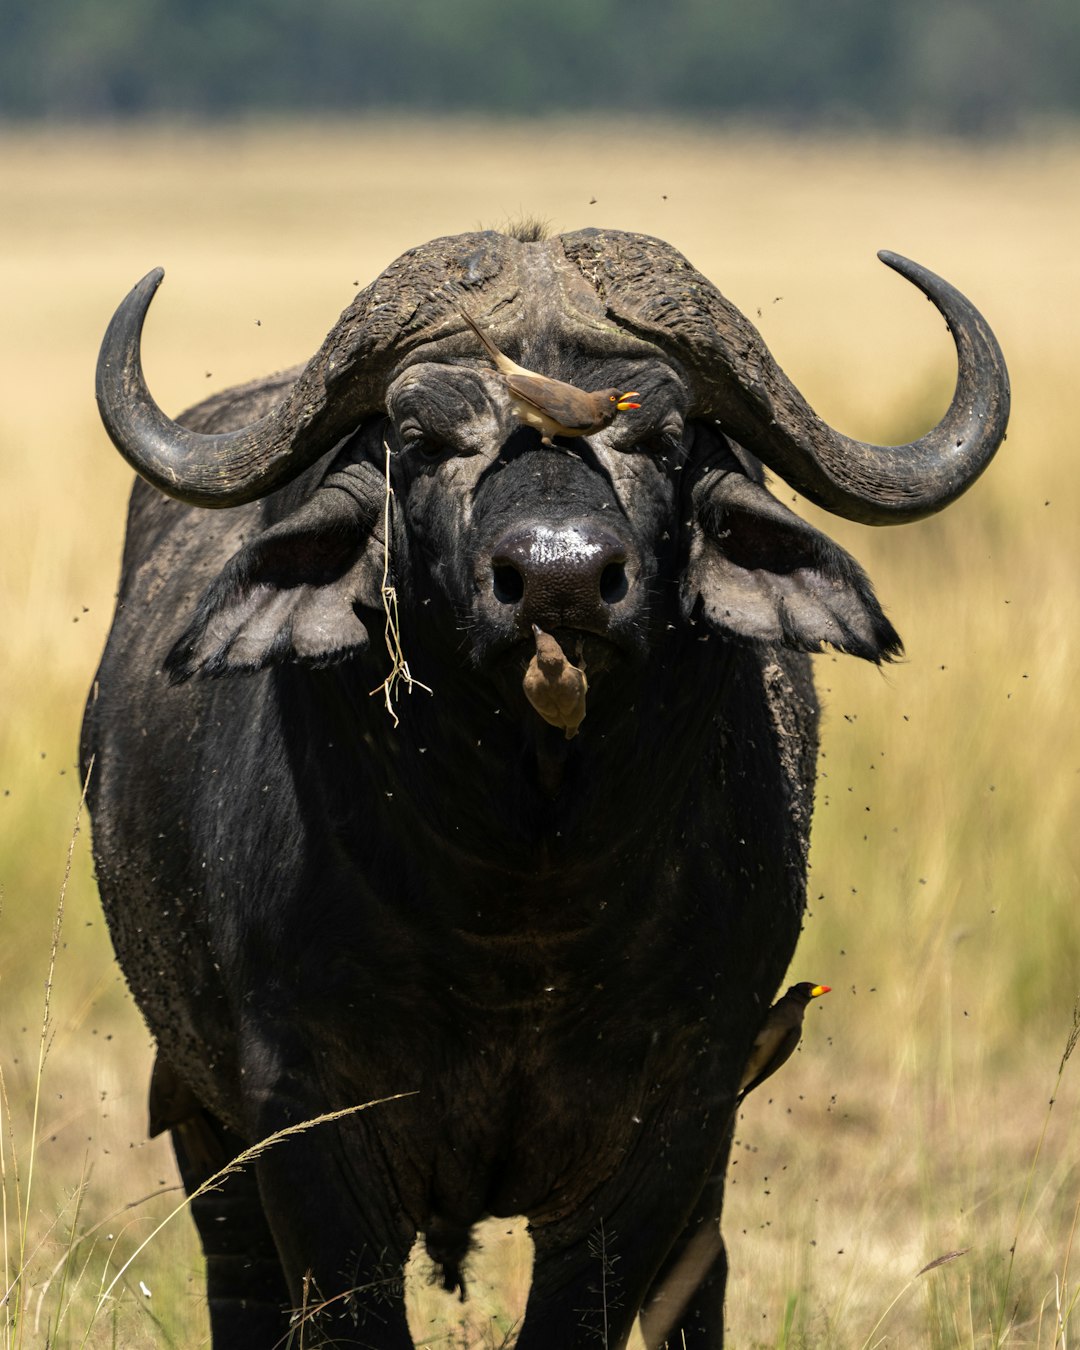 black water buffalo on brown grass field during daytime